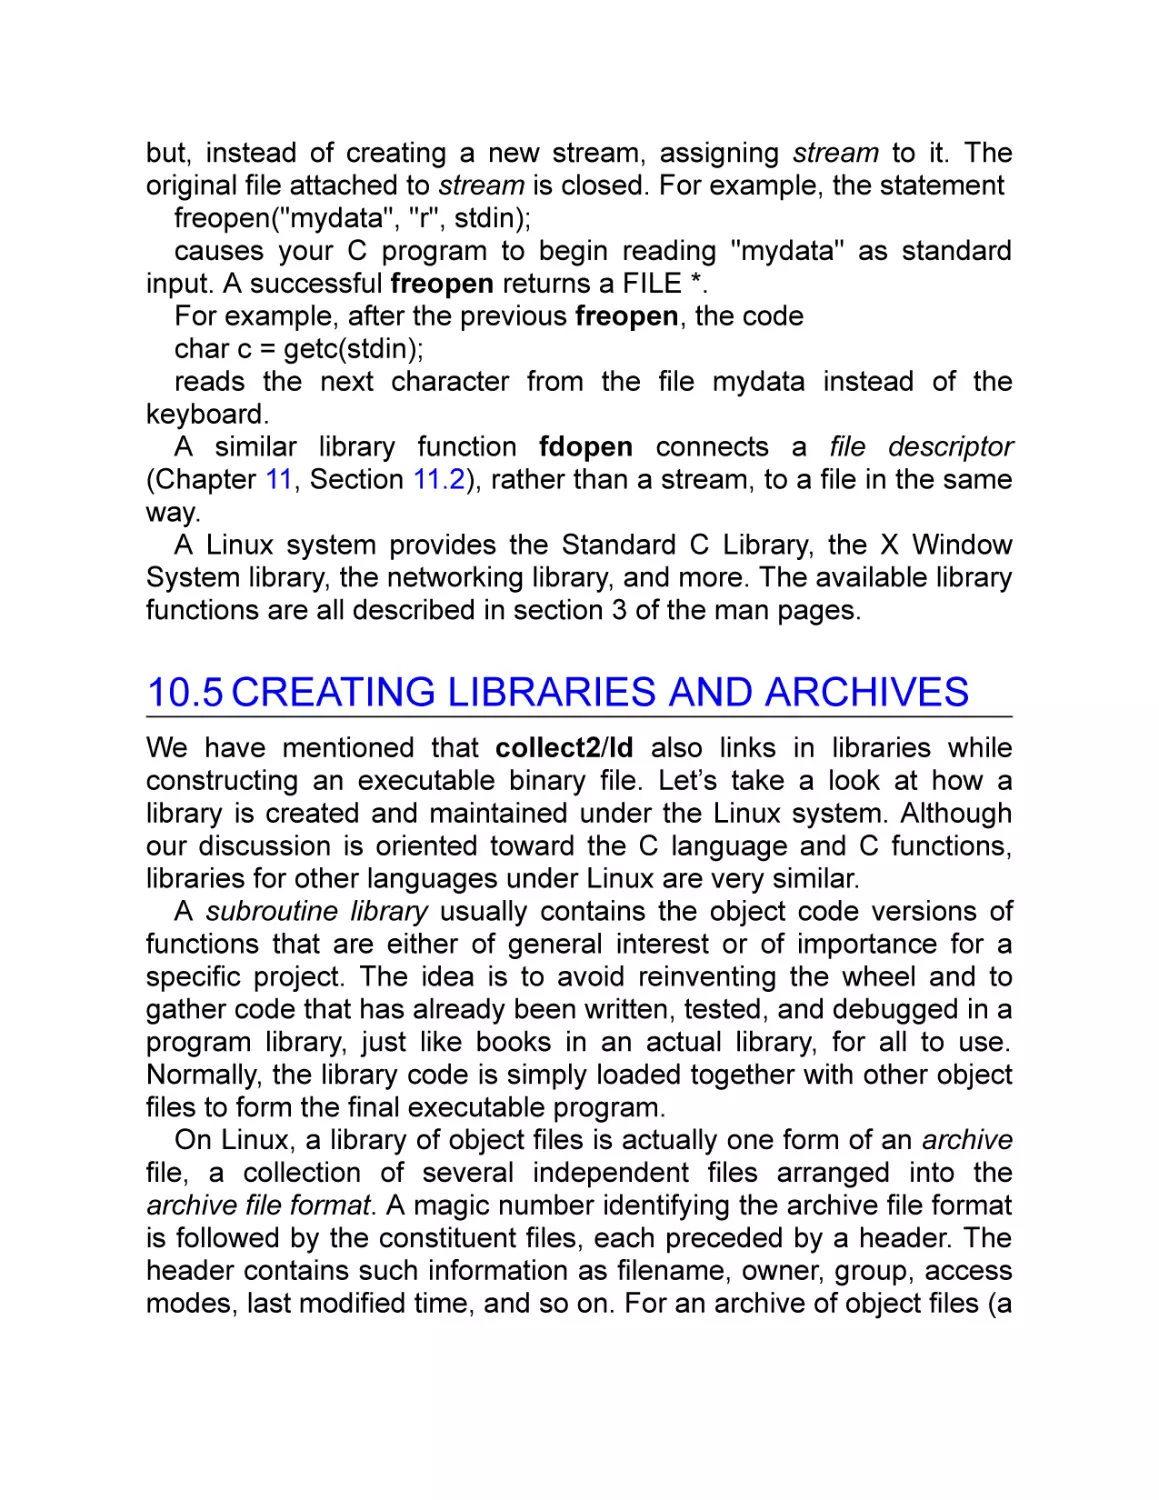 10.5 Creating Libraries and Archives